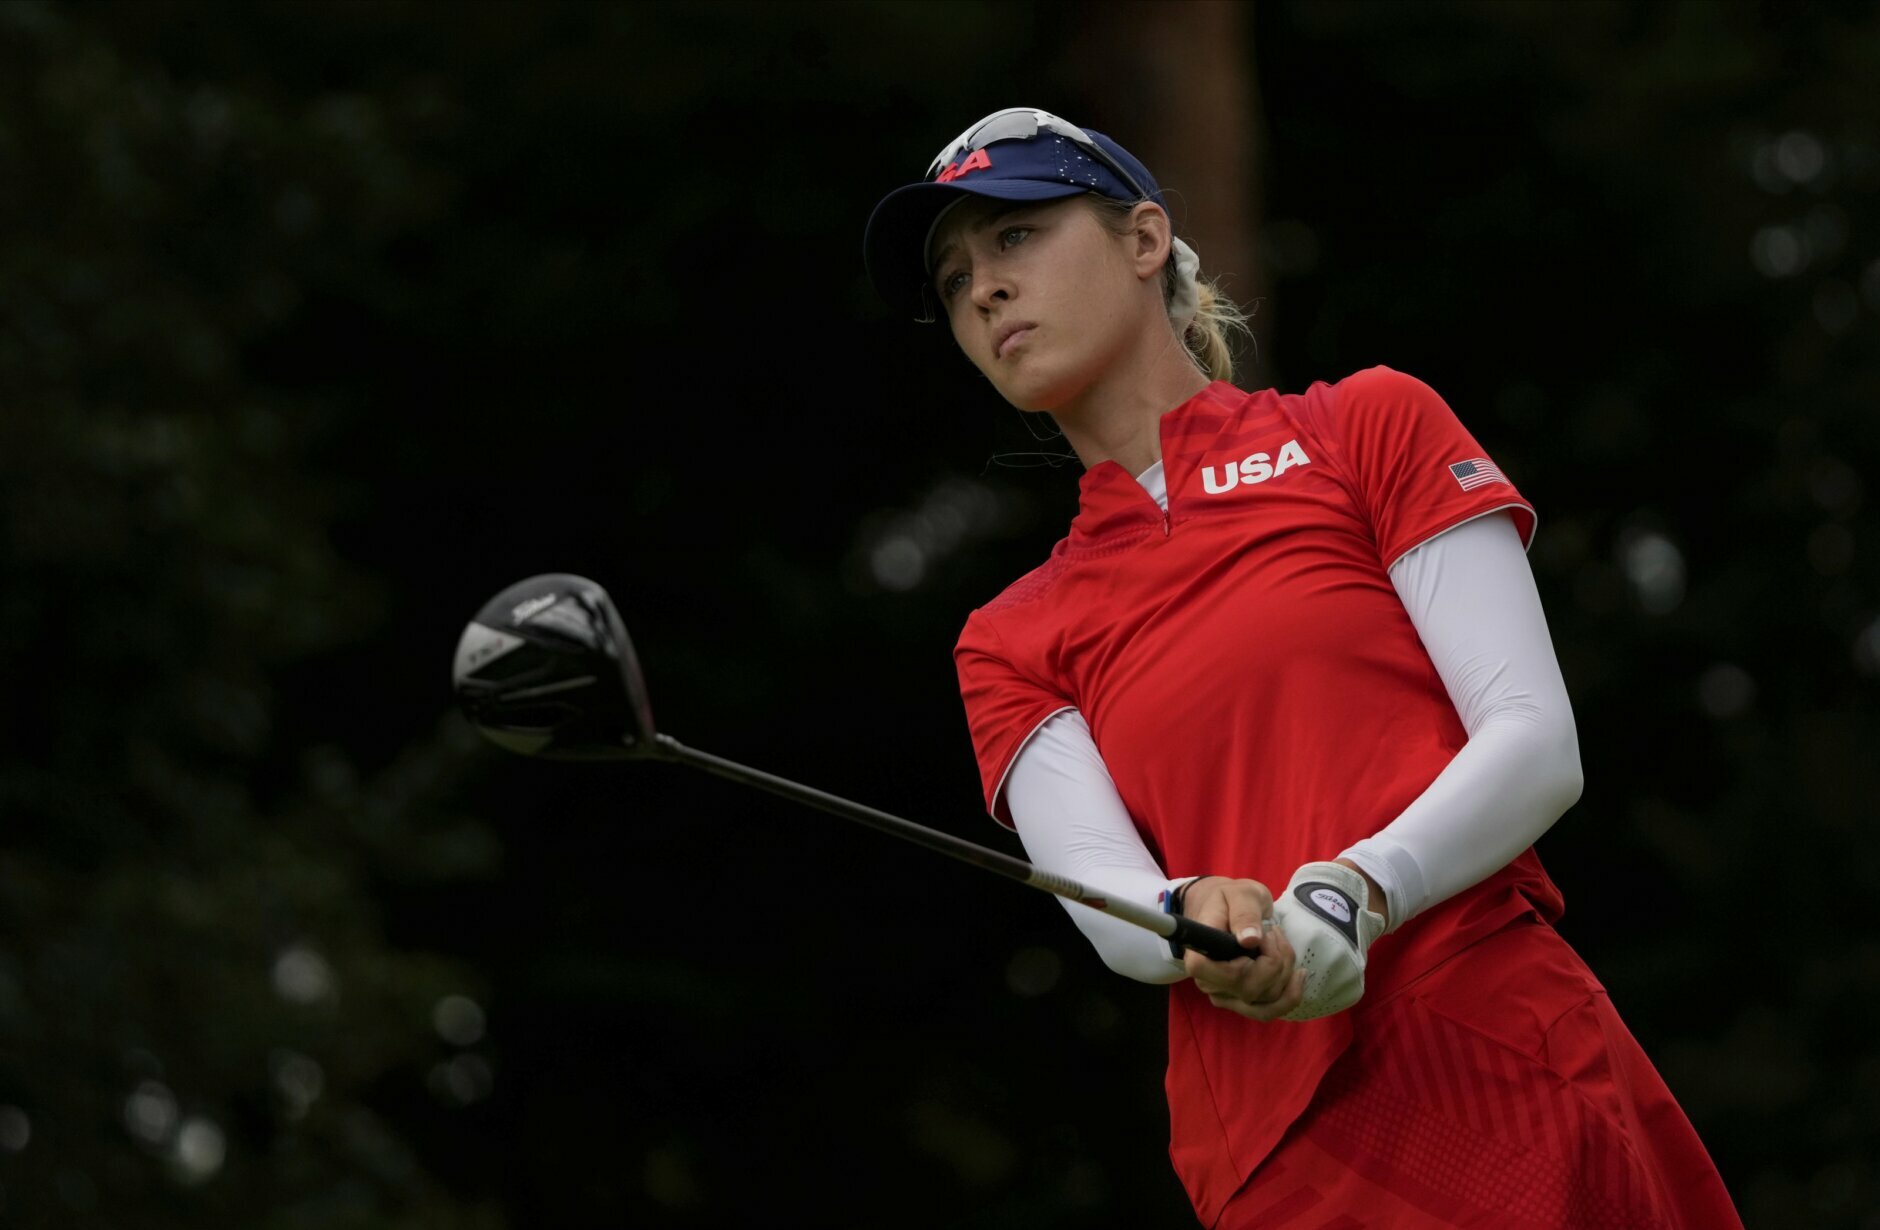 Nelly Korda, of the United States, watches her tee shot on the 18th hole during the final round of the women's golf event at the 2020 Summer Olympics, Saturday, Aug. 7, 2021, at the Kasumigaseki Country Club in Kawagoe, Japan. (AP Photo/Andy Wong)